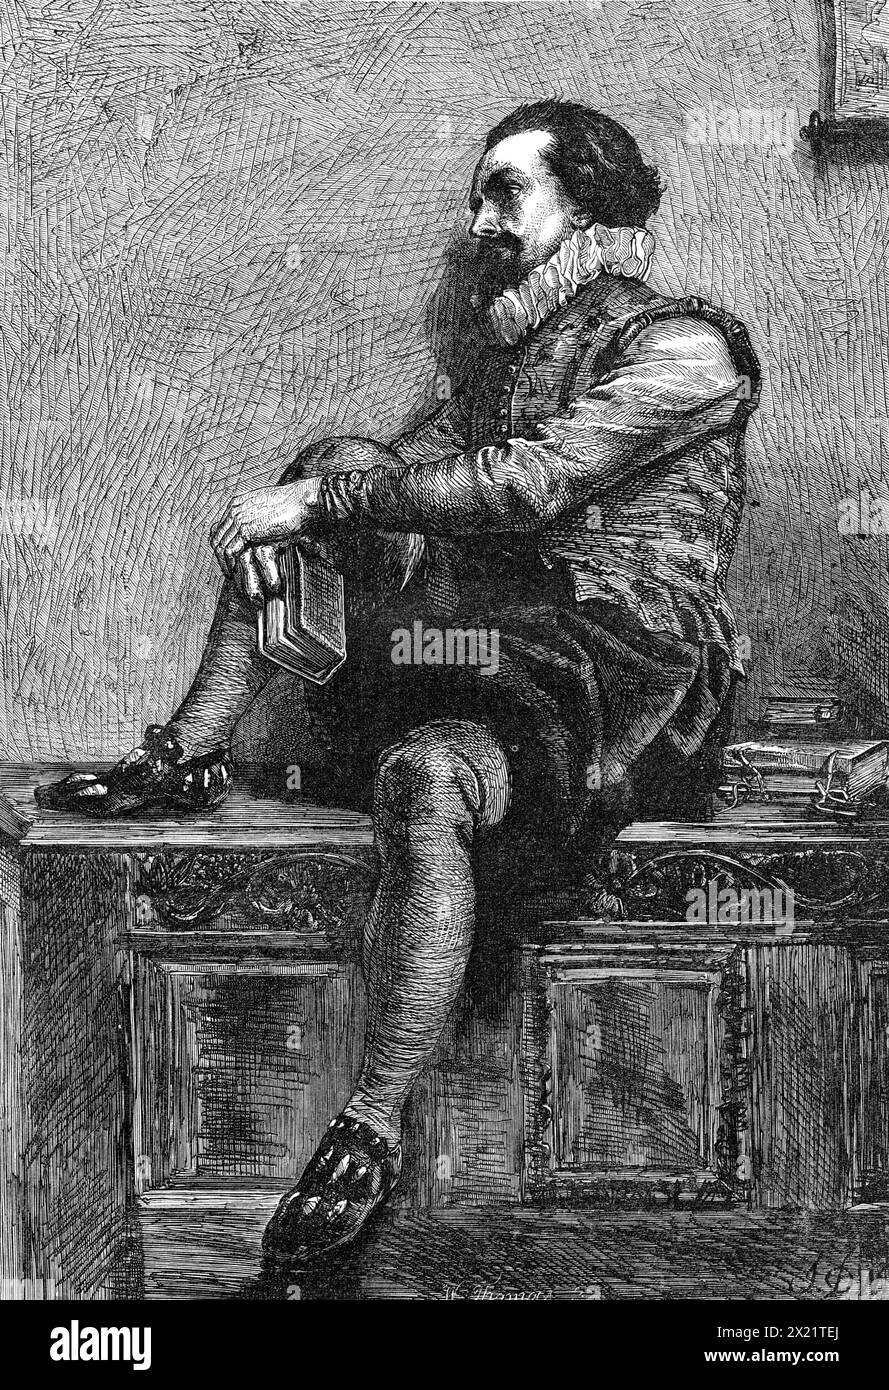 &quot;A Train of Thought,&quot; by J. D. Watson, in the Winter Exhibition, 1864. '...the subject of this picture...is simply a young, intelligent, and gallant-looking fellow, dressed in Elizabethan doublet, raff, trunk hose, and slashed shoes, sitting on a carved chest or cabinet, and nursing one leg in an attitude of meditation. He seems to have fallen into a &quot;train of thought,&quot; suggested by the book he has been reading. His thoughtful physiognomy, his books, his dress, and bearing allow us to conjecture that, like Raleigh and other celebrities of the time, he may be at once scholar Stock Photo